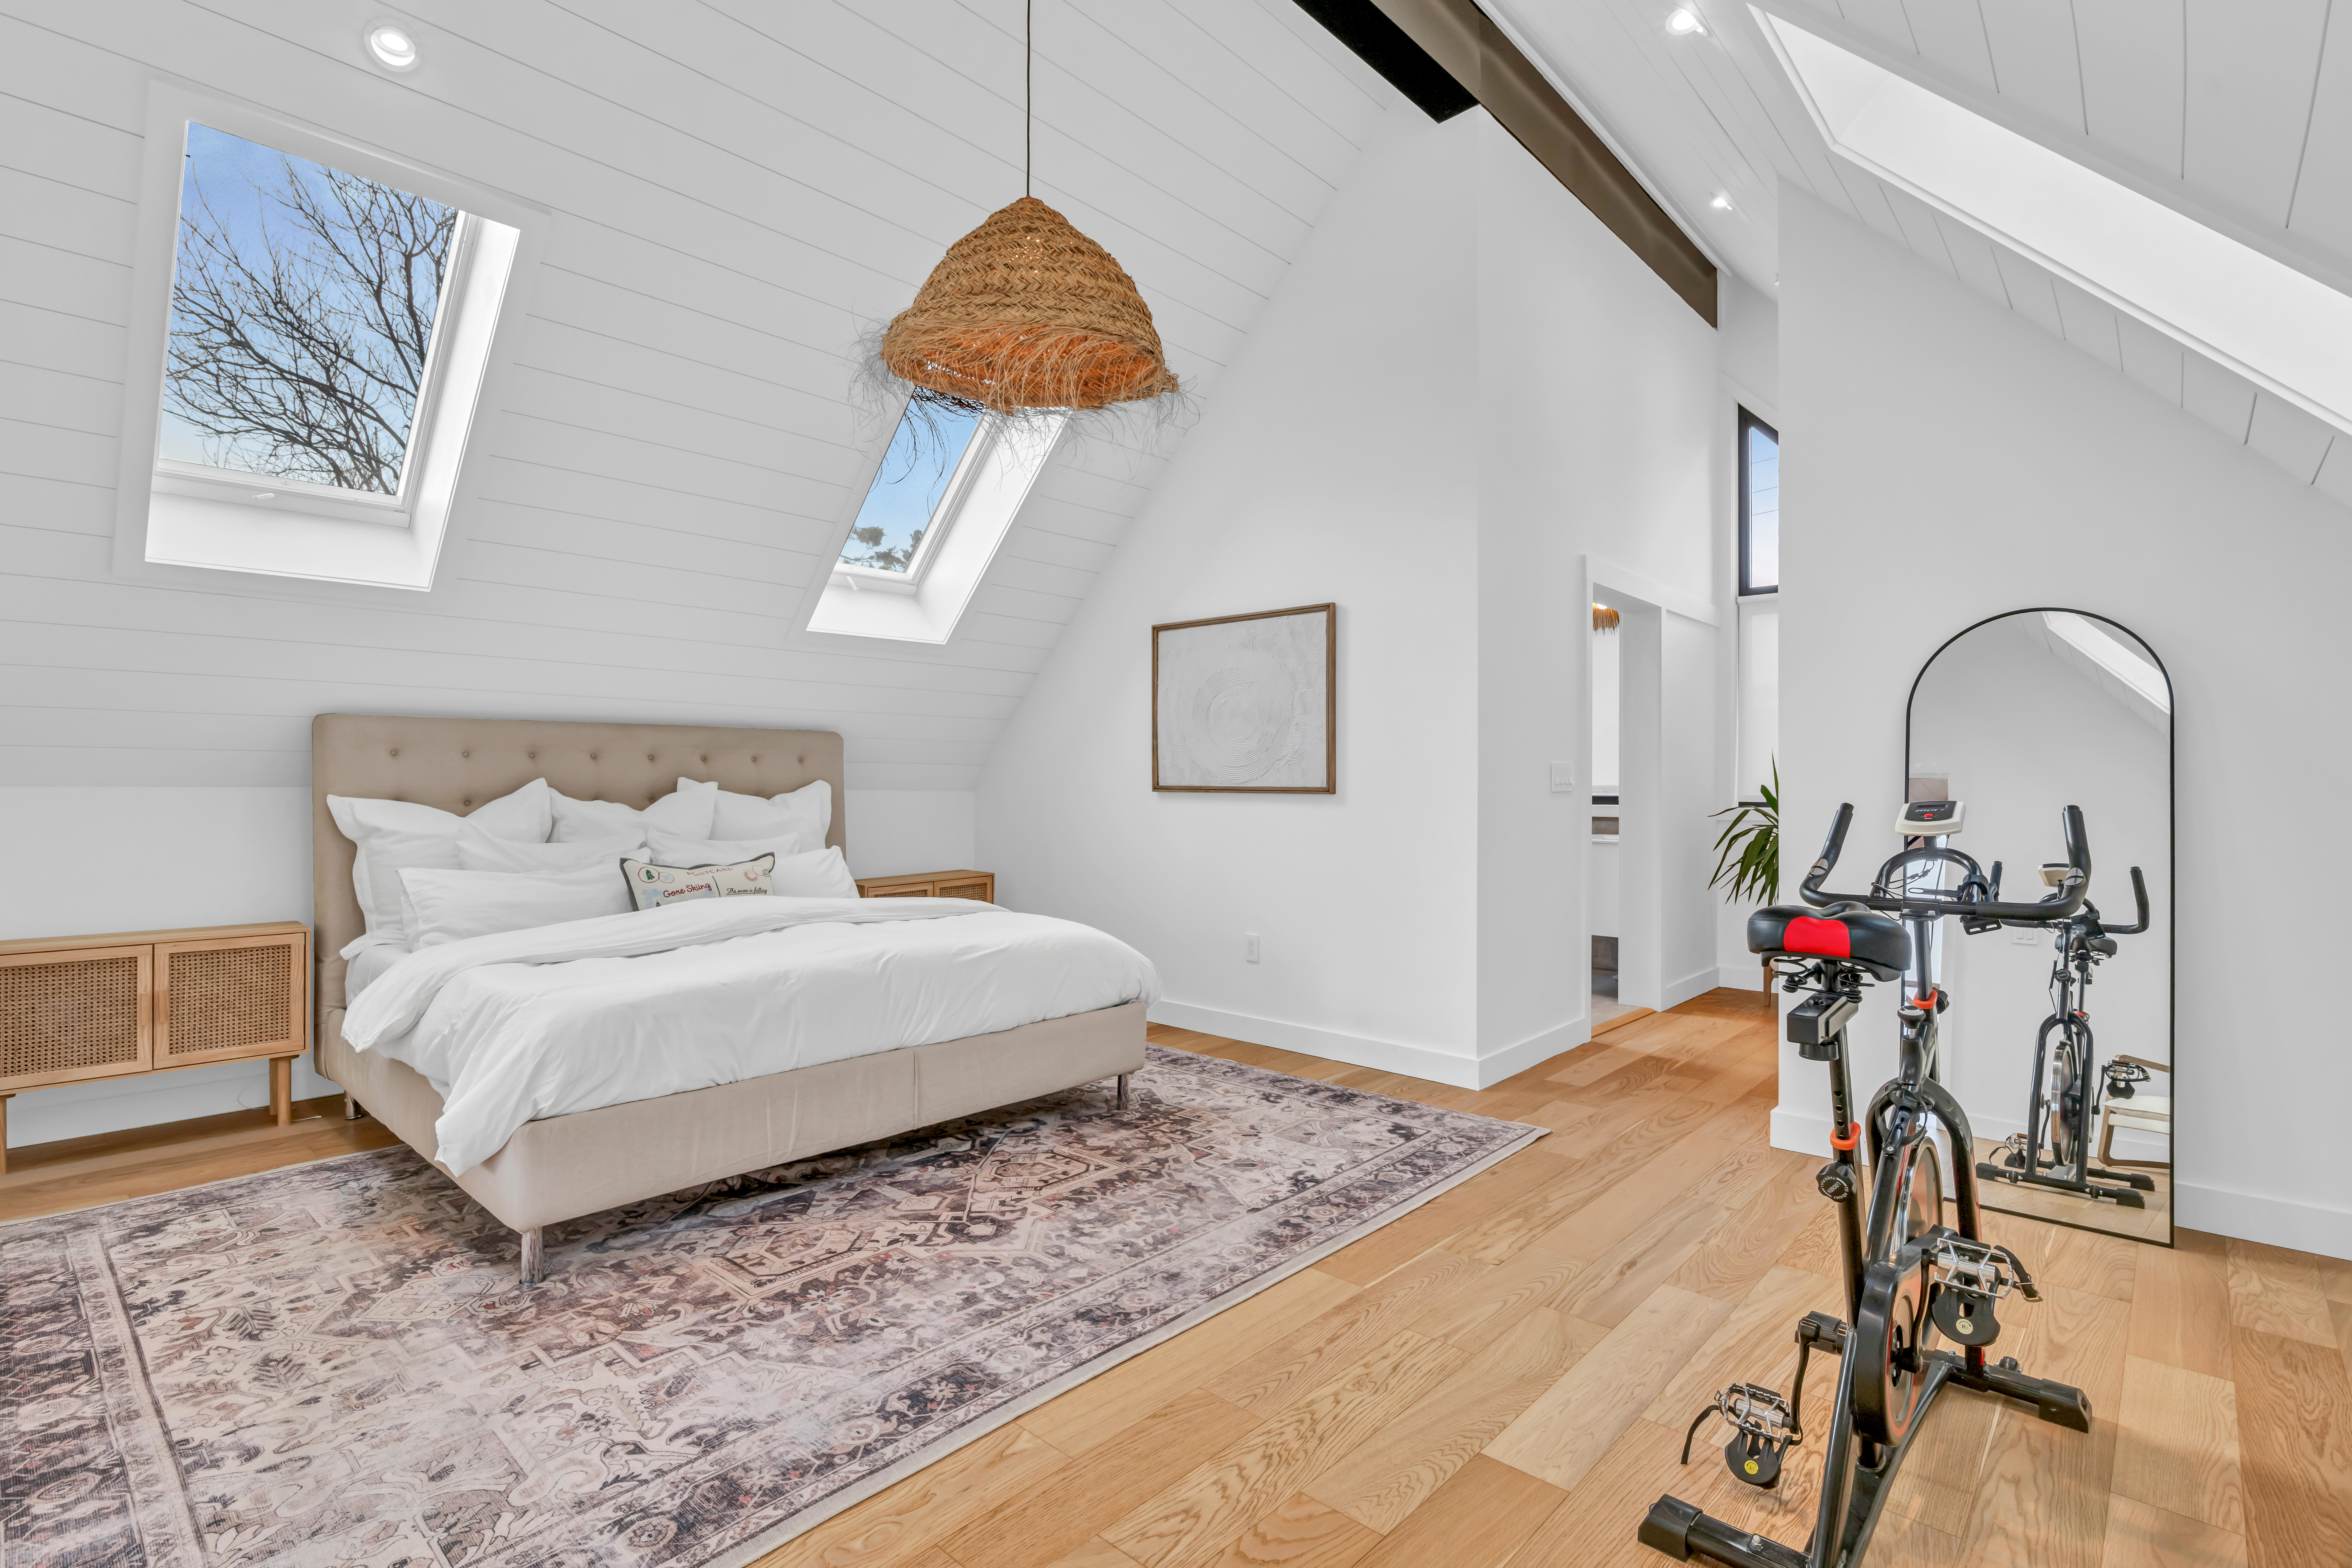 A big bed in a bright, open room, on top of a large area rug on a hardwood floor. The slanted ceiling has skylights, letting in lots of natural light. There is an exercise bike and a mirror across from the bed, and a short, narrow hallway leads to an ensuite bathroom.